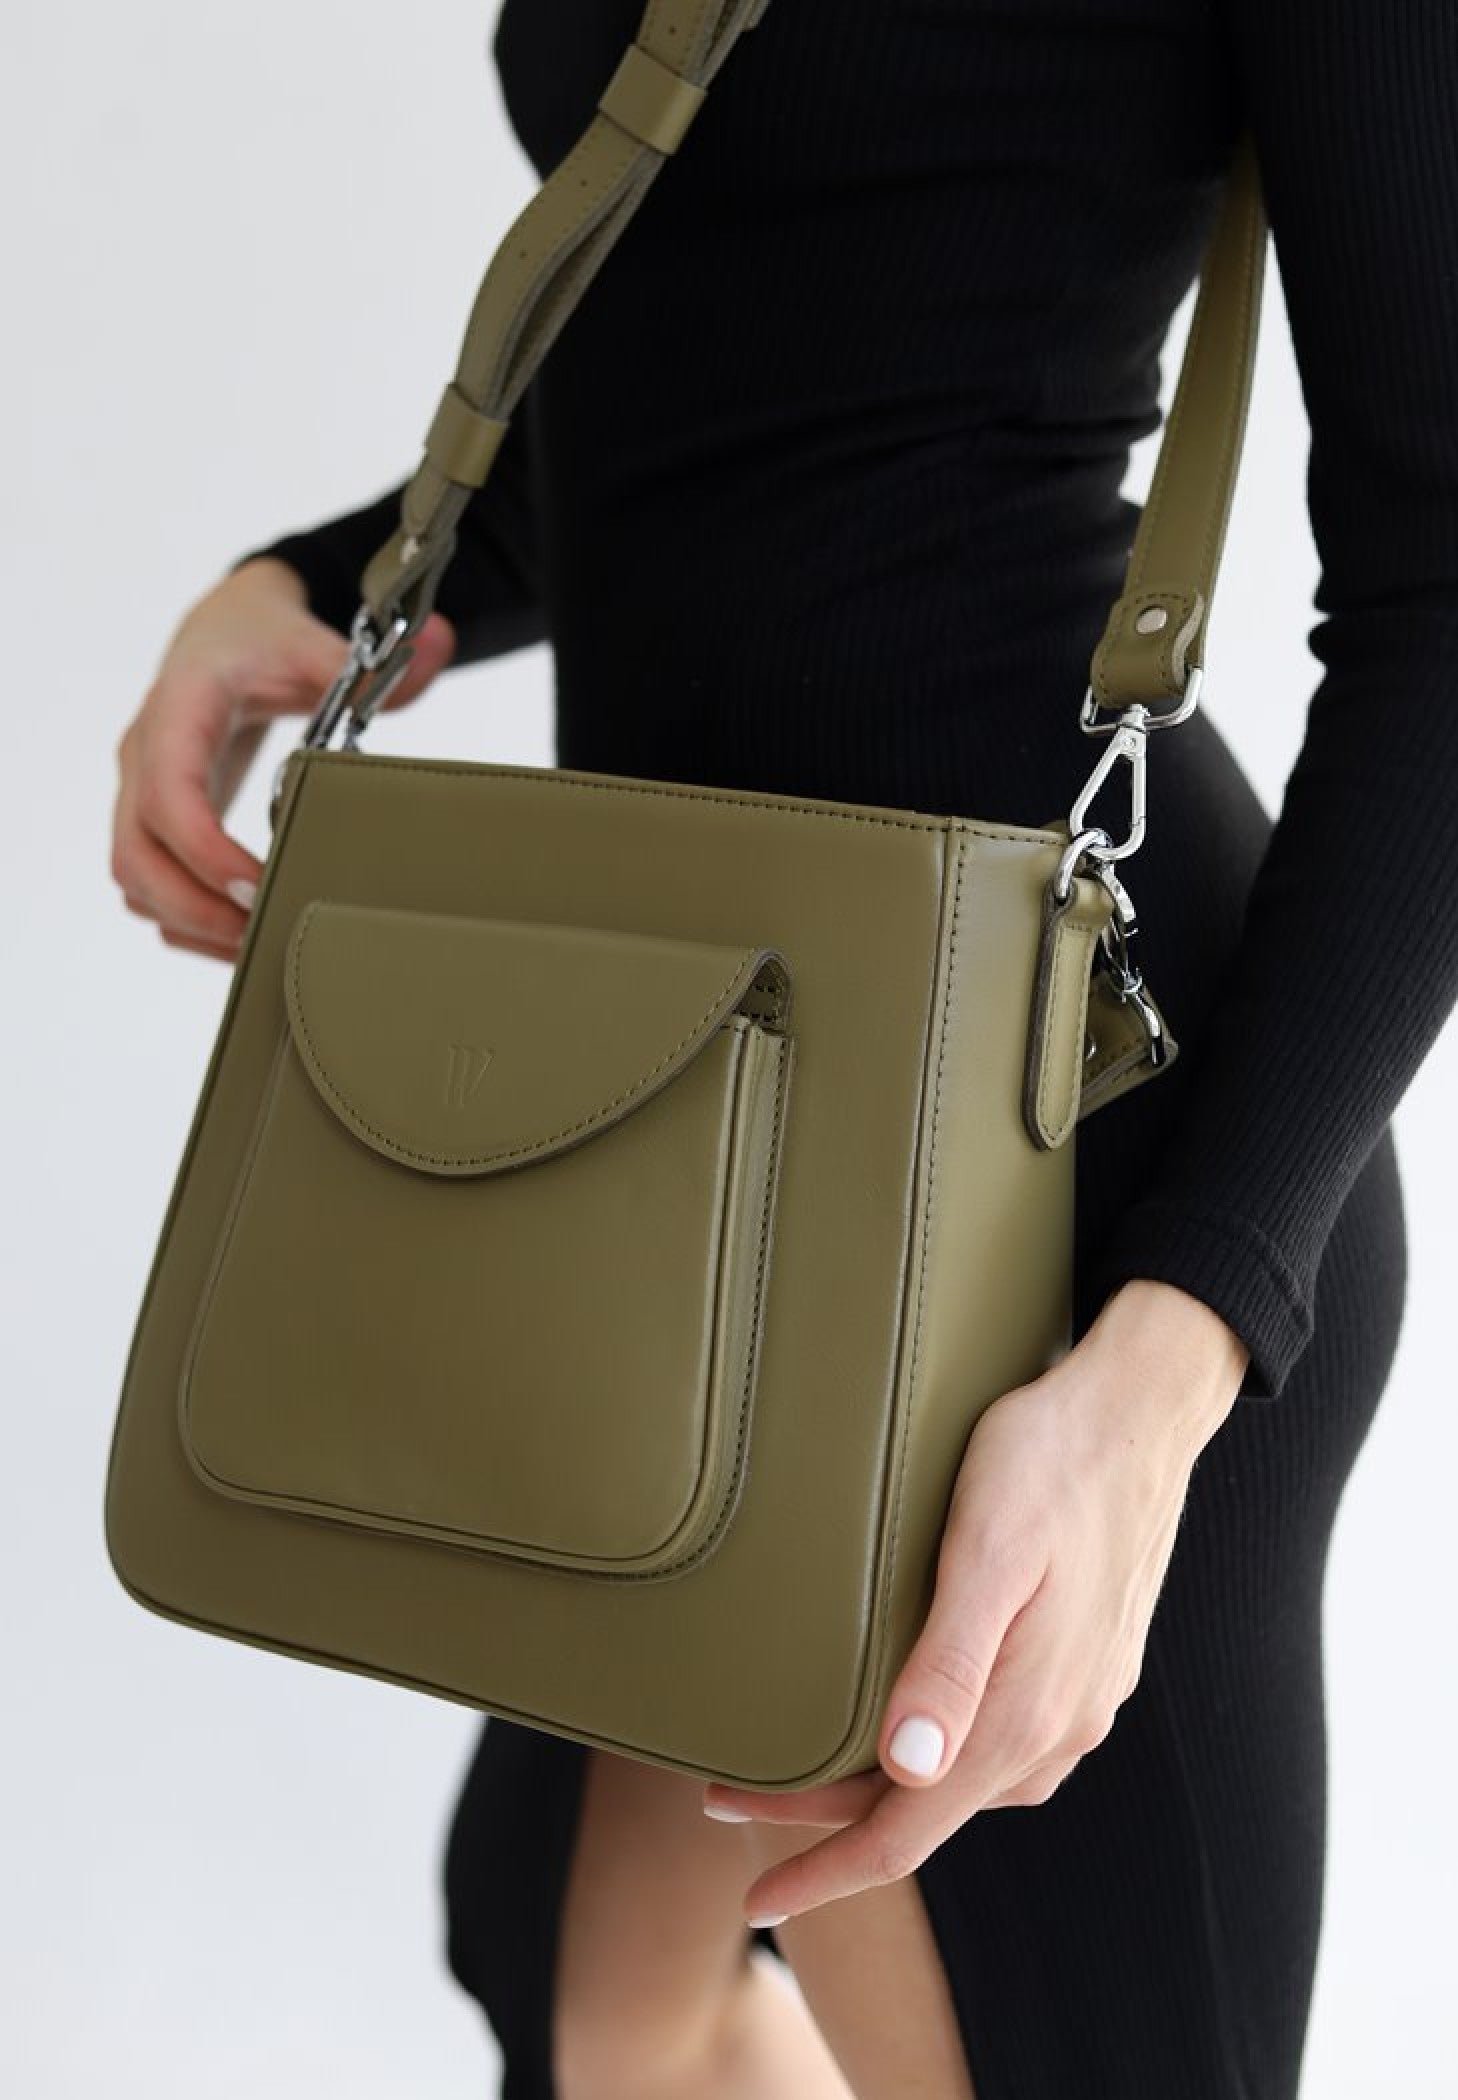 a leather bag for women in green olive color. It can hold a medium size wallet, a cell phone, keys and some essentials